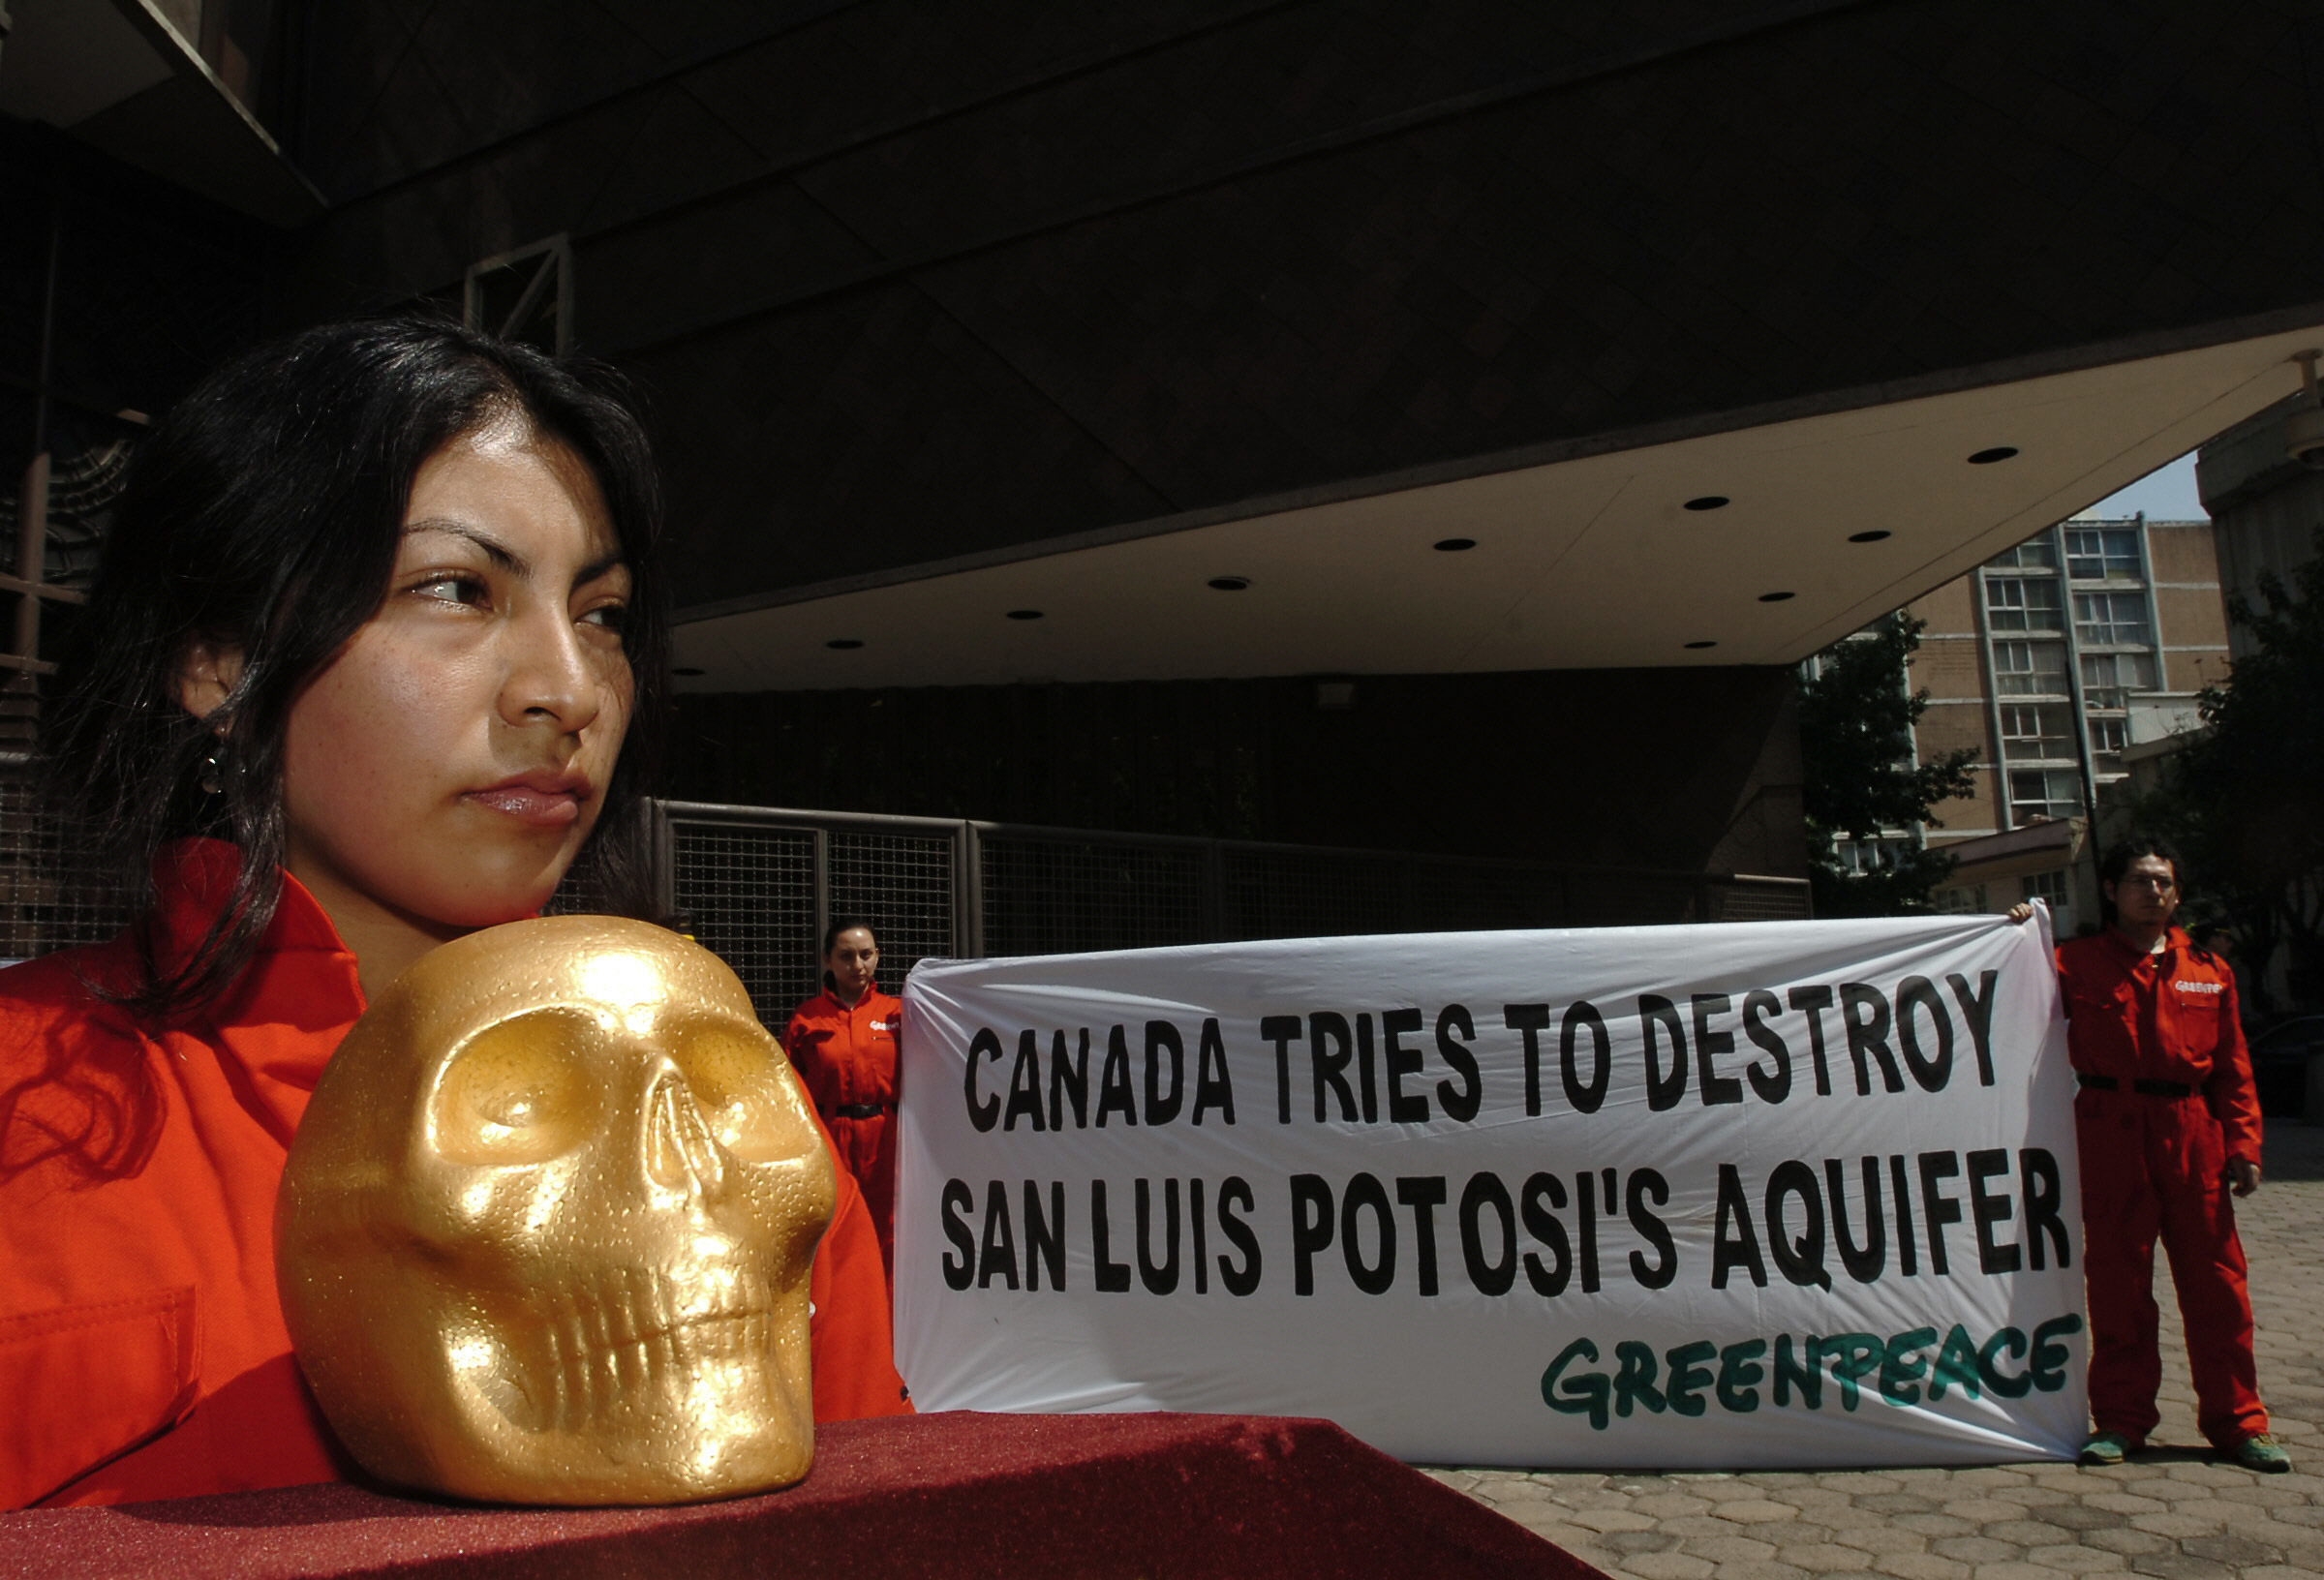 A Greenpeace activist during a protest against Canadian mining companies in Mexico. May 23, 2006.